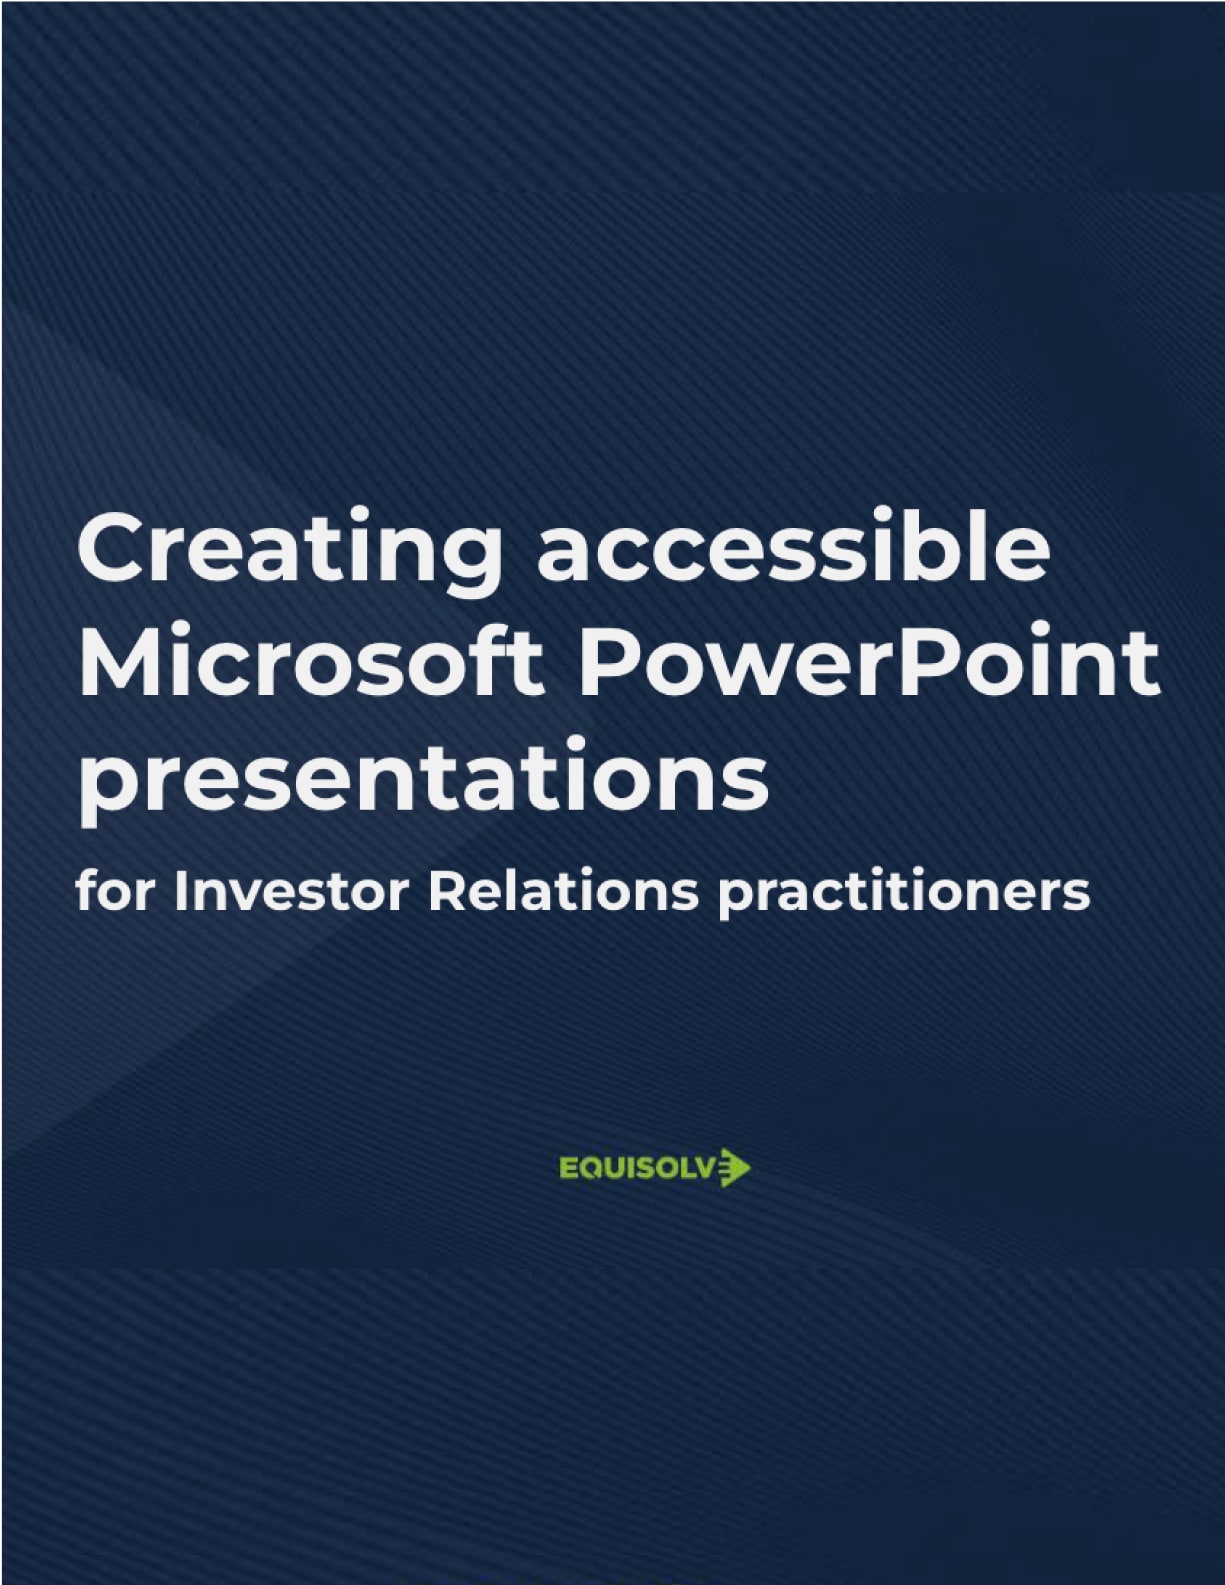 How to make your PowerPoint presentations accessible